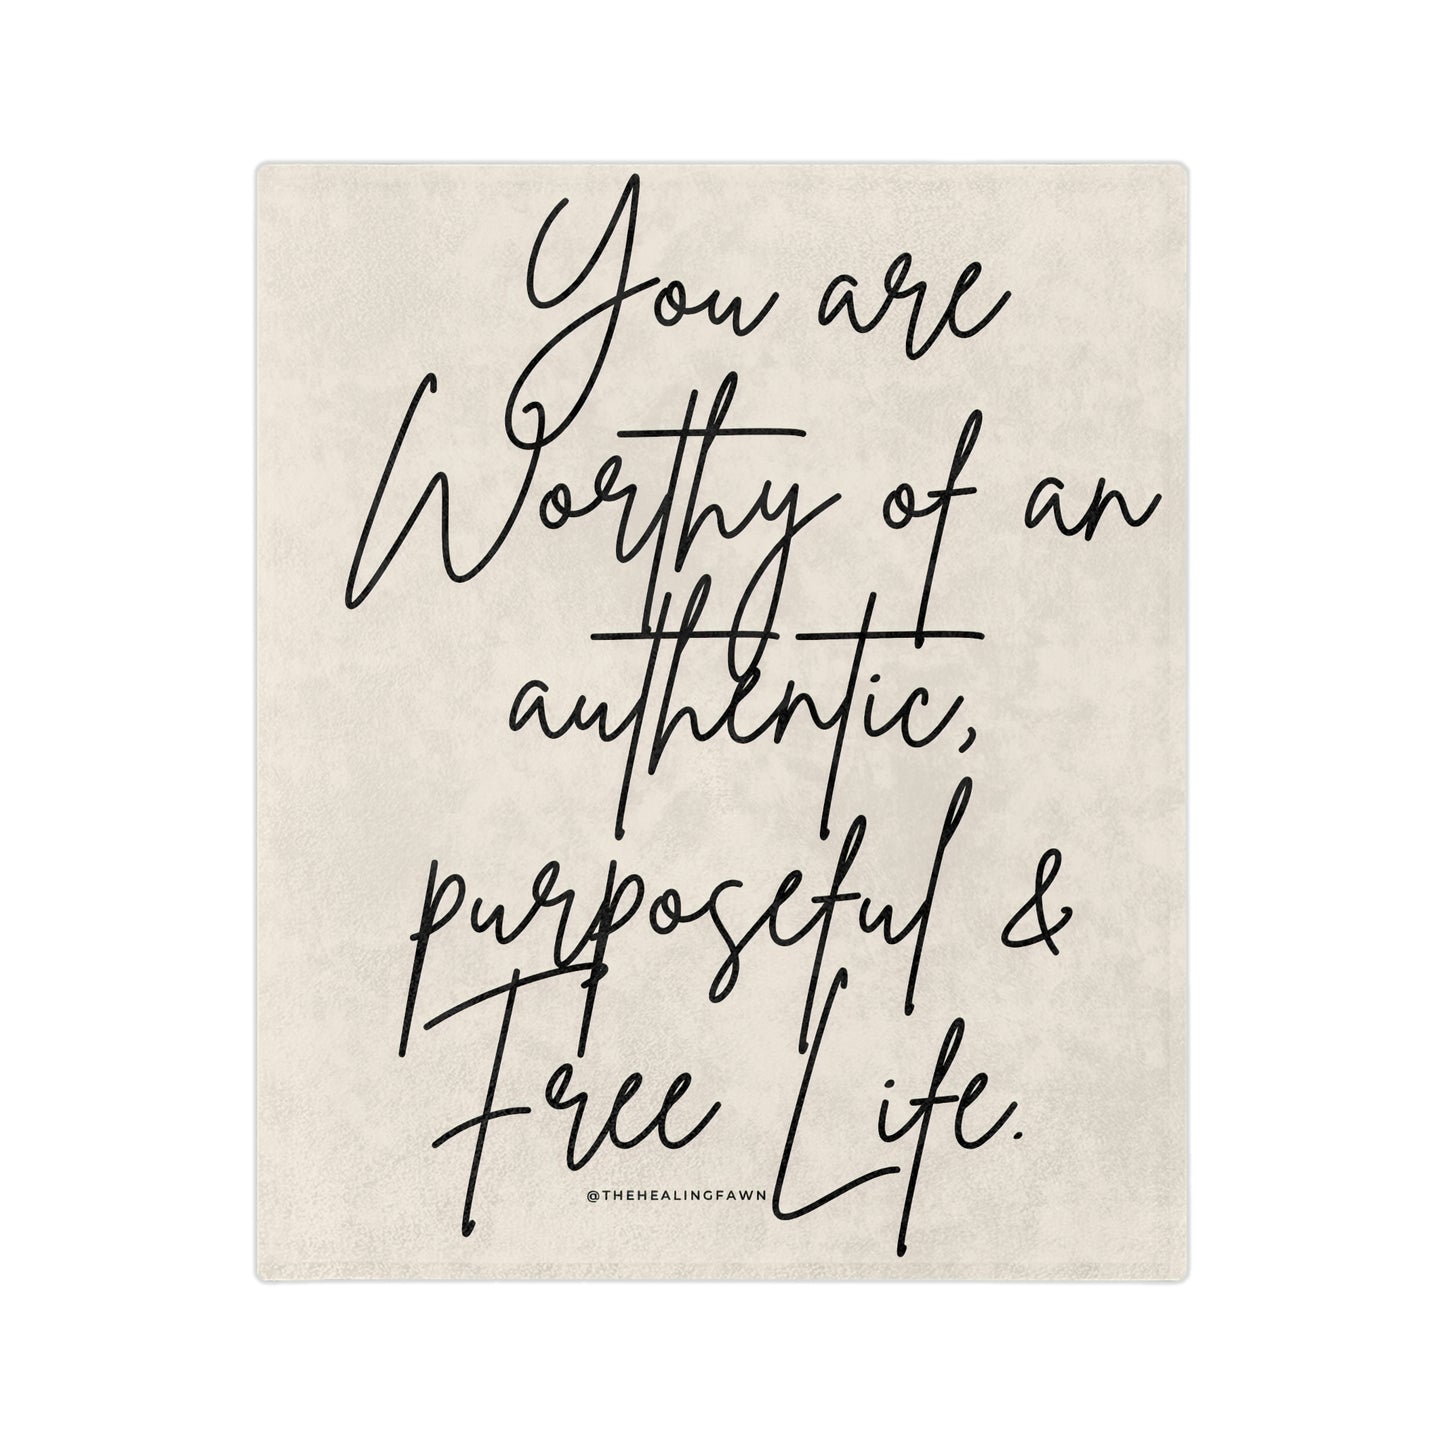 You are Worthy- Affirmation Throw Blanket